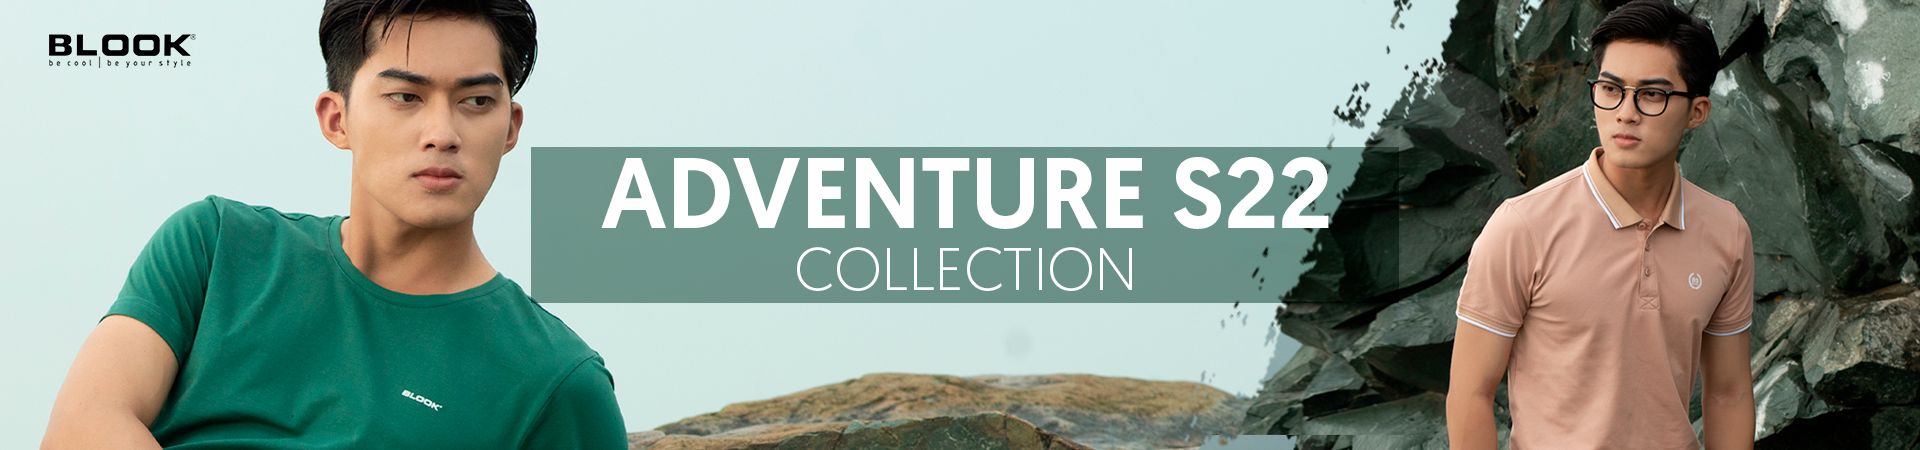 NEW COLLECTION - ADVENTURE S22